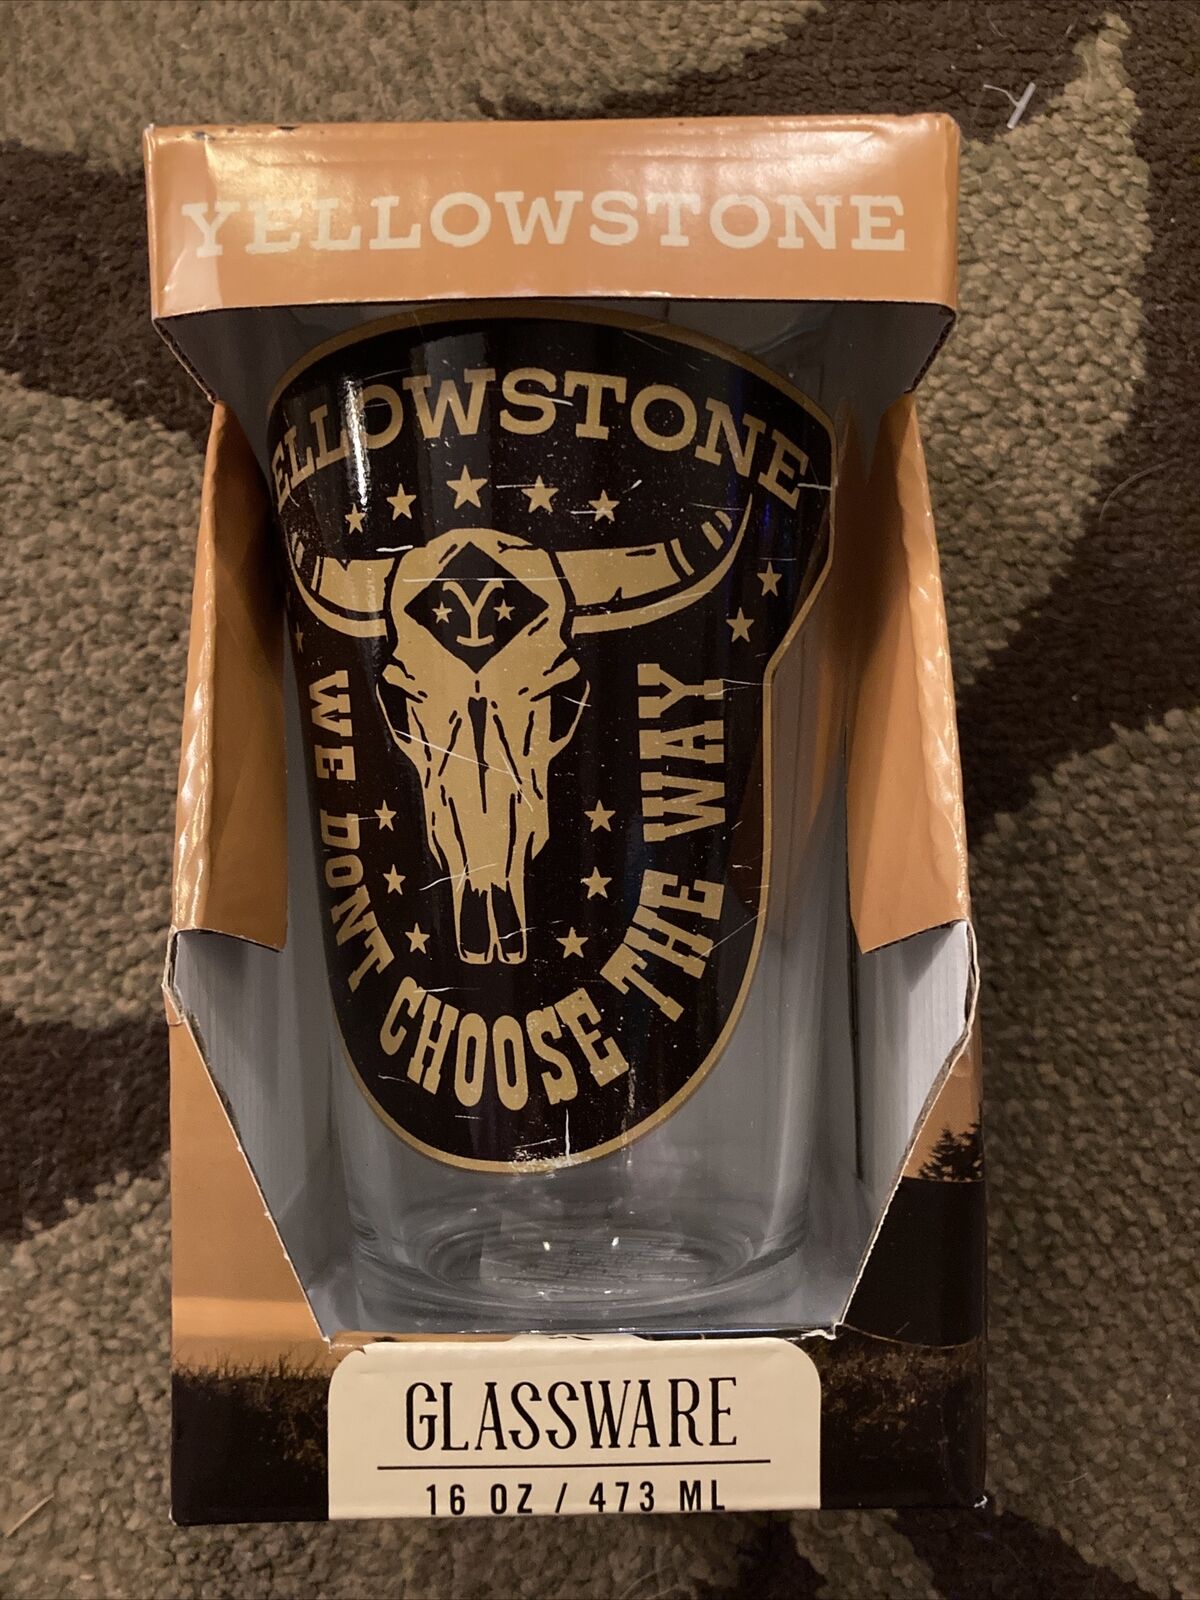 NEW YELLOWSTONE WE DON’T CHOOSE THE WAY 16 Oz GLASS Authentic Merch + Free Cards